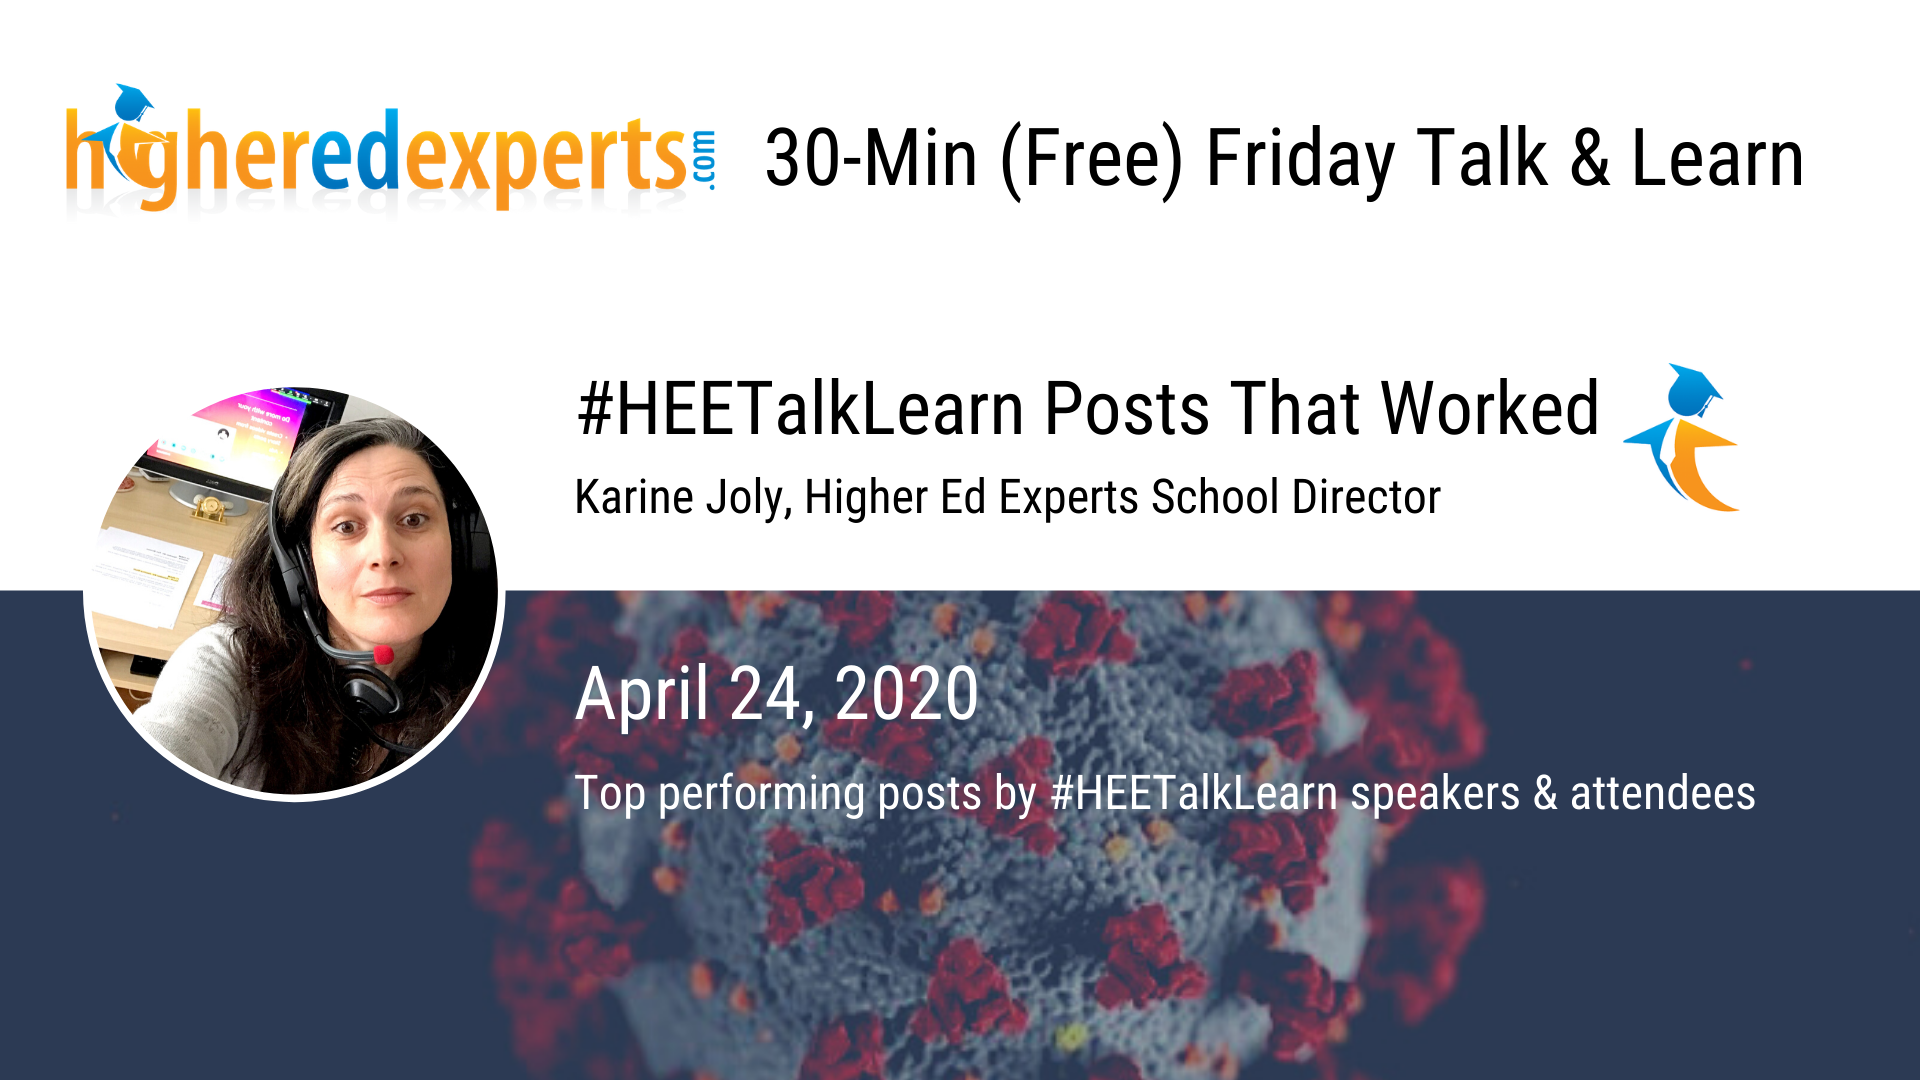 #HEETalkLearn Posts that Worked (April 24, 2020): Augmented Reality Instagram Sticker, Proud Binge Watching, Self-Care & Distancing Tips